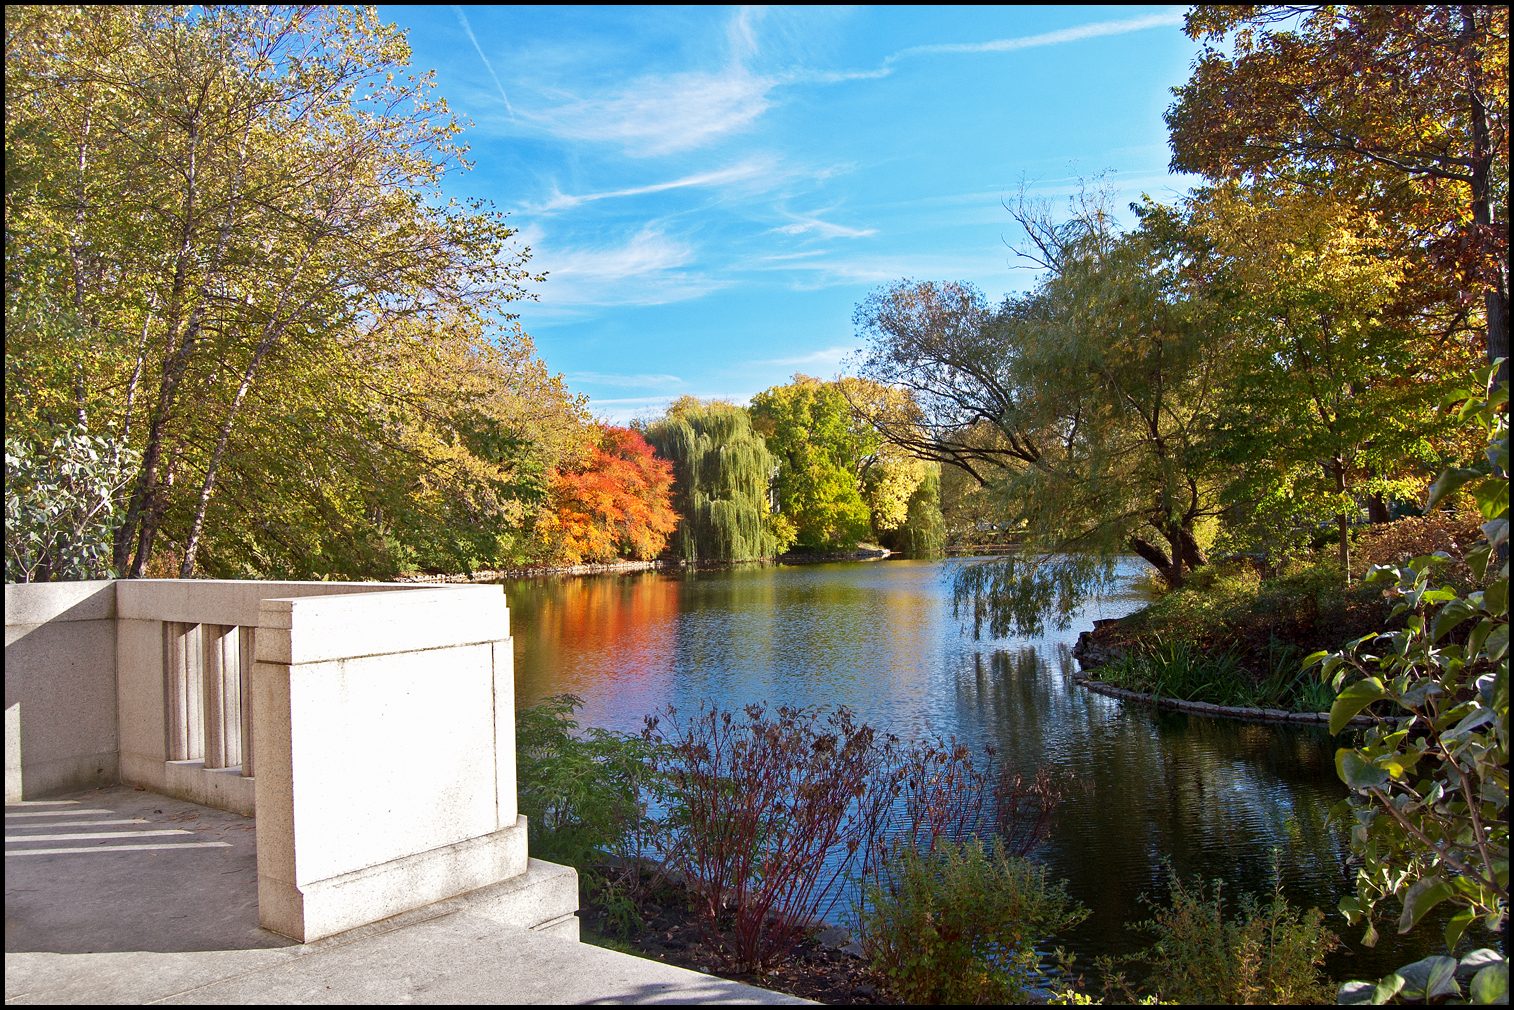 Graceland Cemetery Fall Afternoon